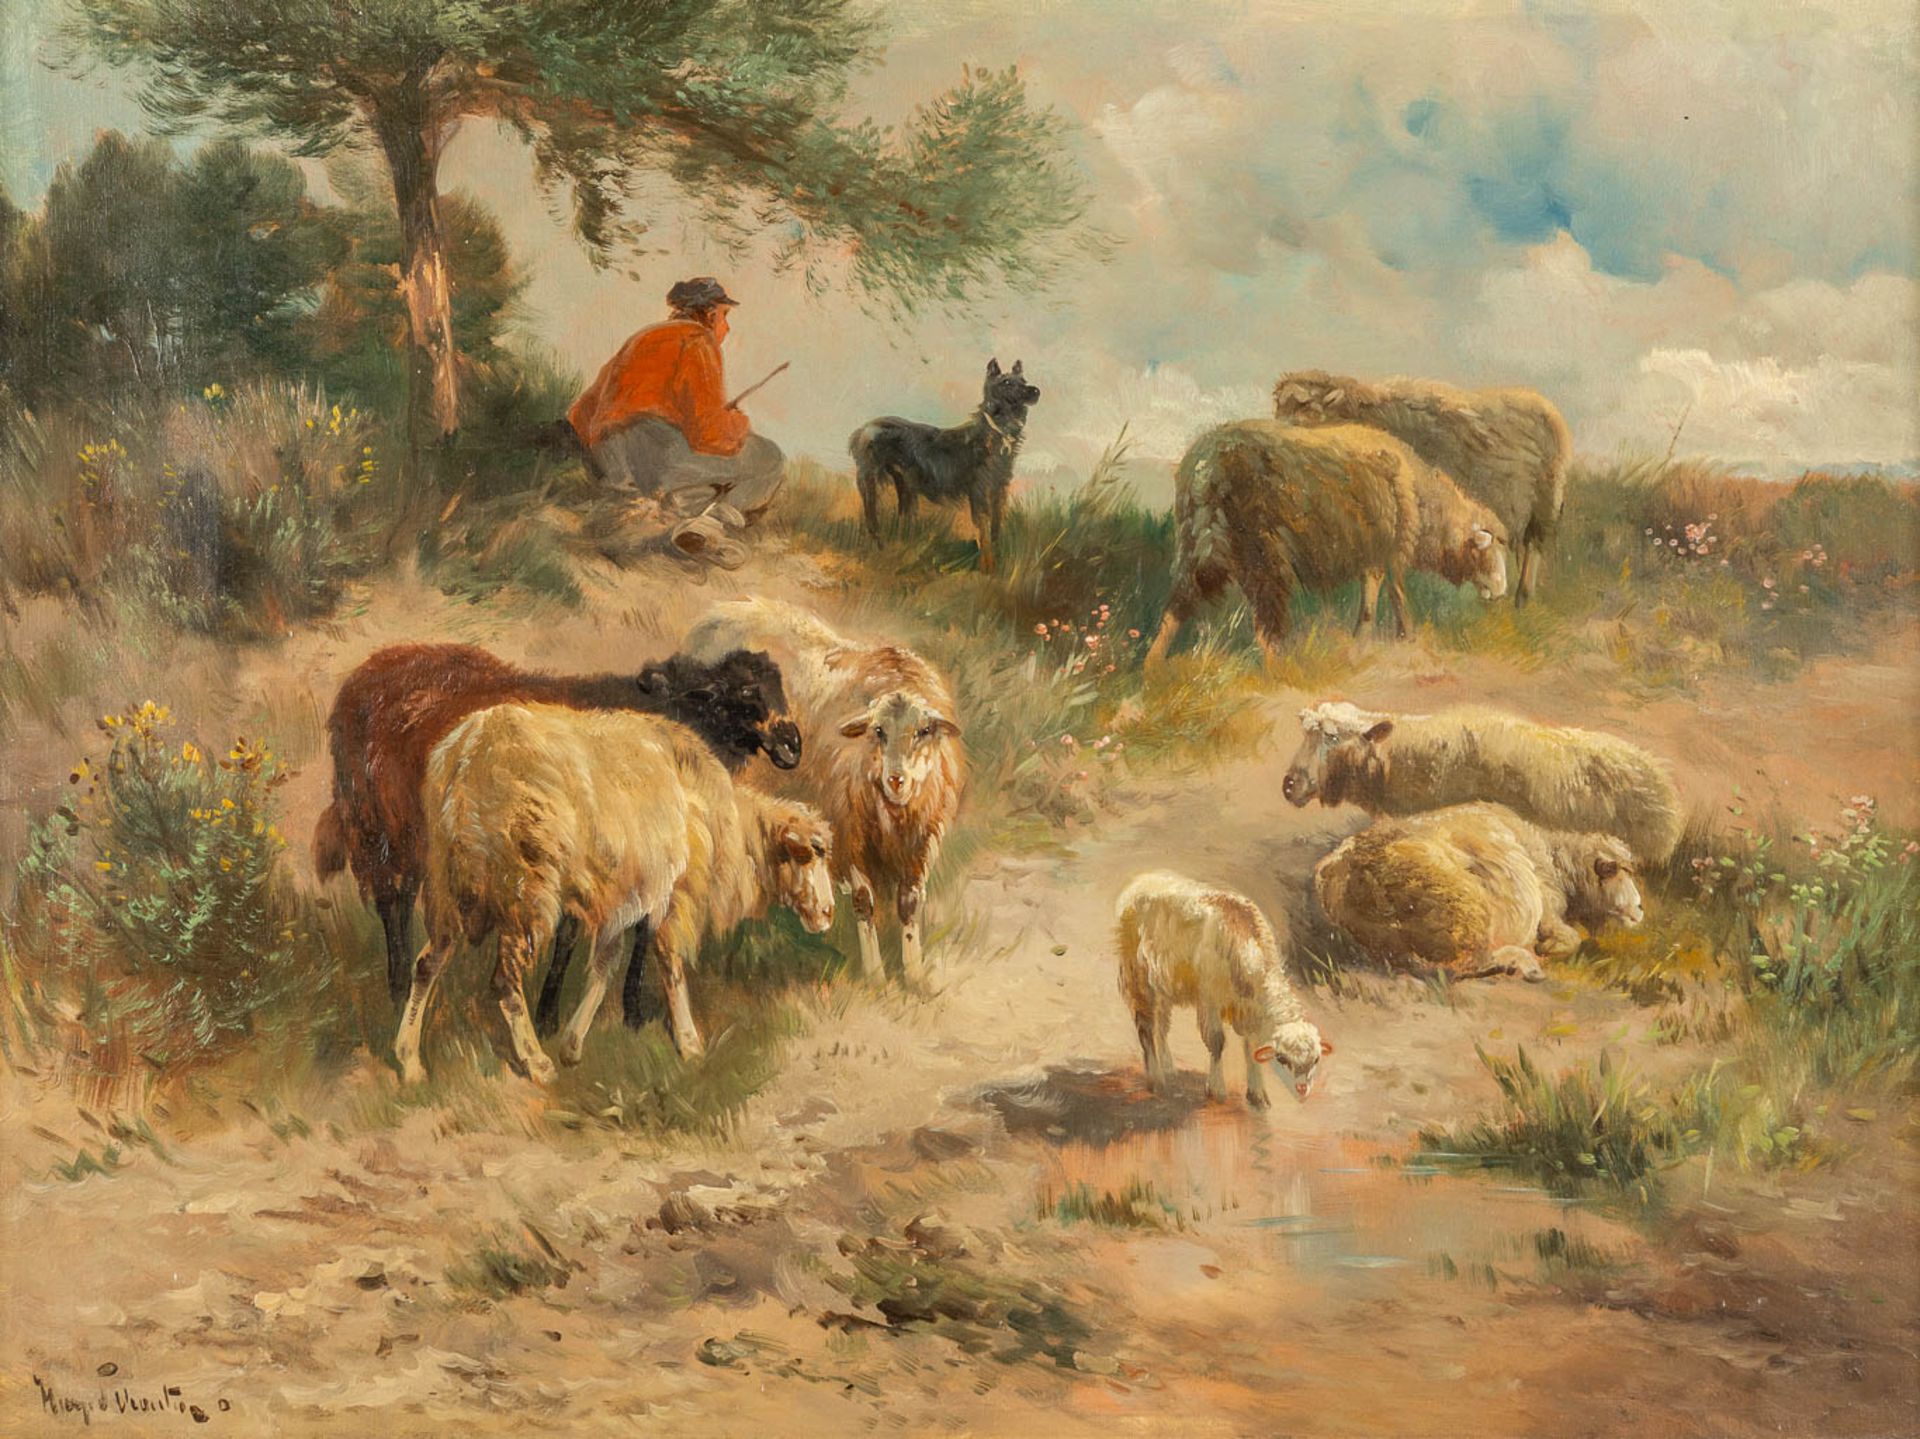 Henry SCHOUTEN (1857/64-1927) 'Sheep herder on the look' oil on canvas. (W:80 x H:60 cm)